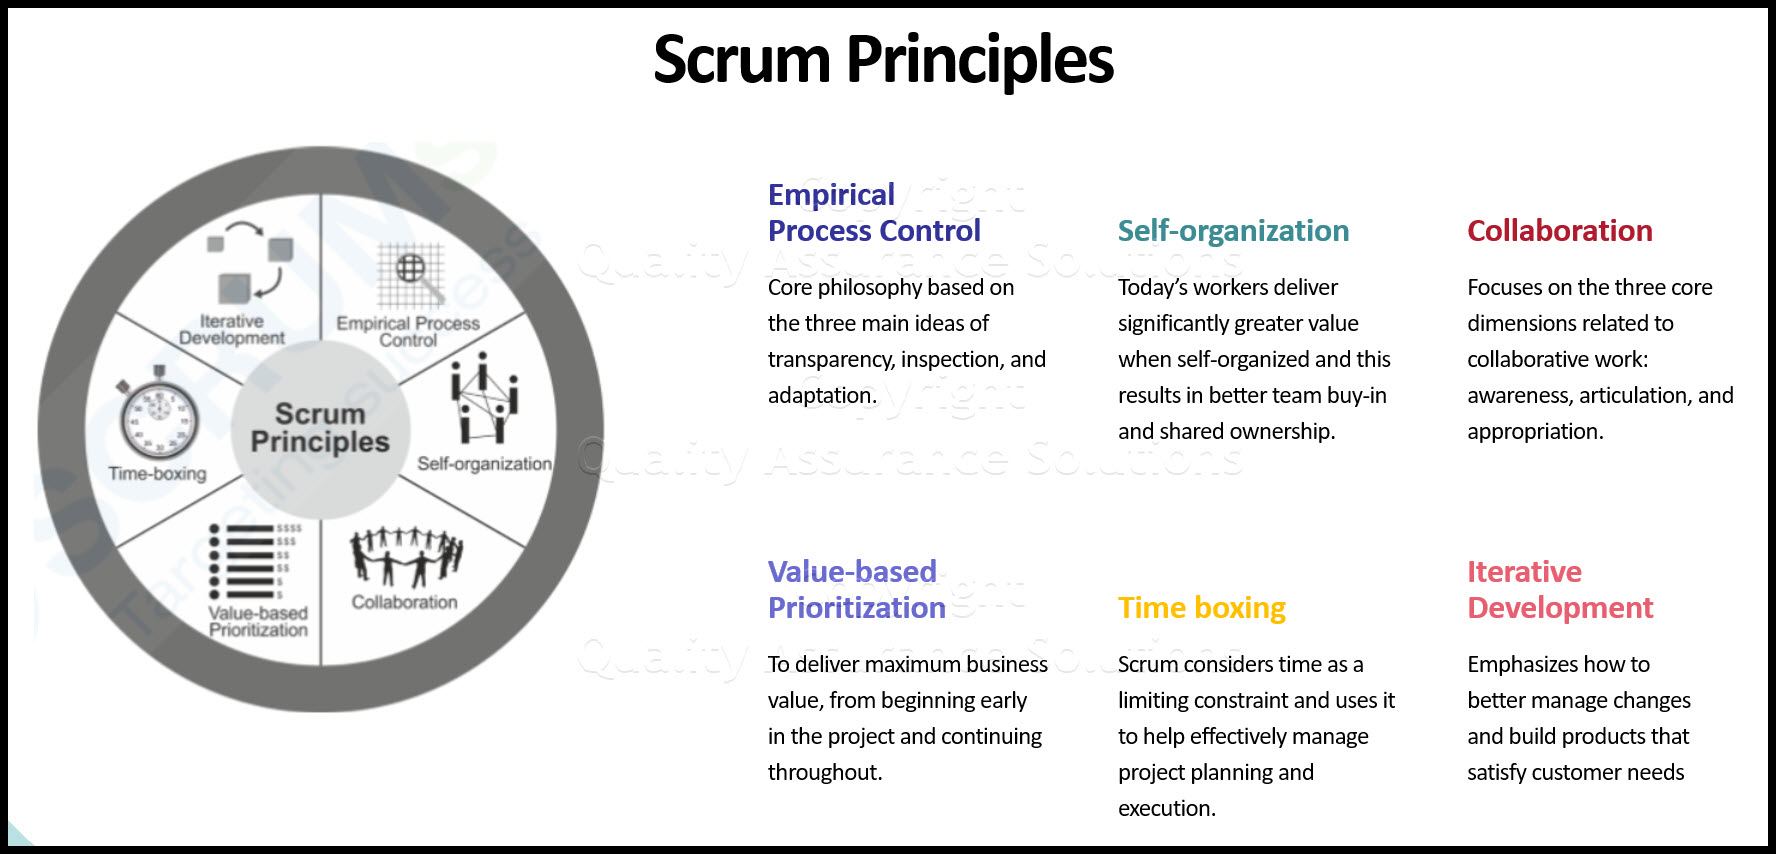 This article describes Scrum Framework. It addresses Scrum Principles and the 5 important Scrum aspects